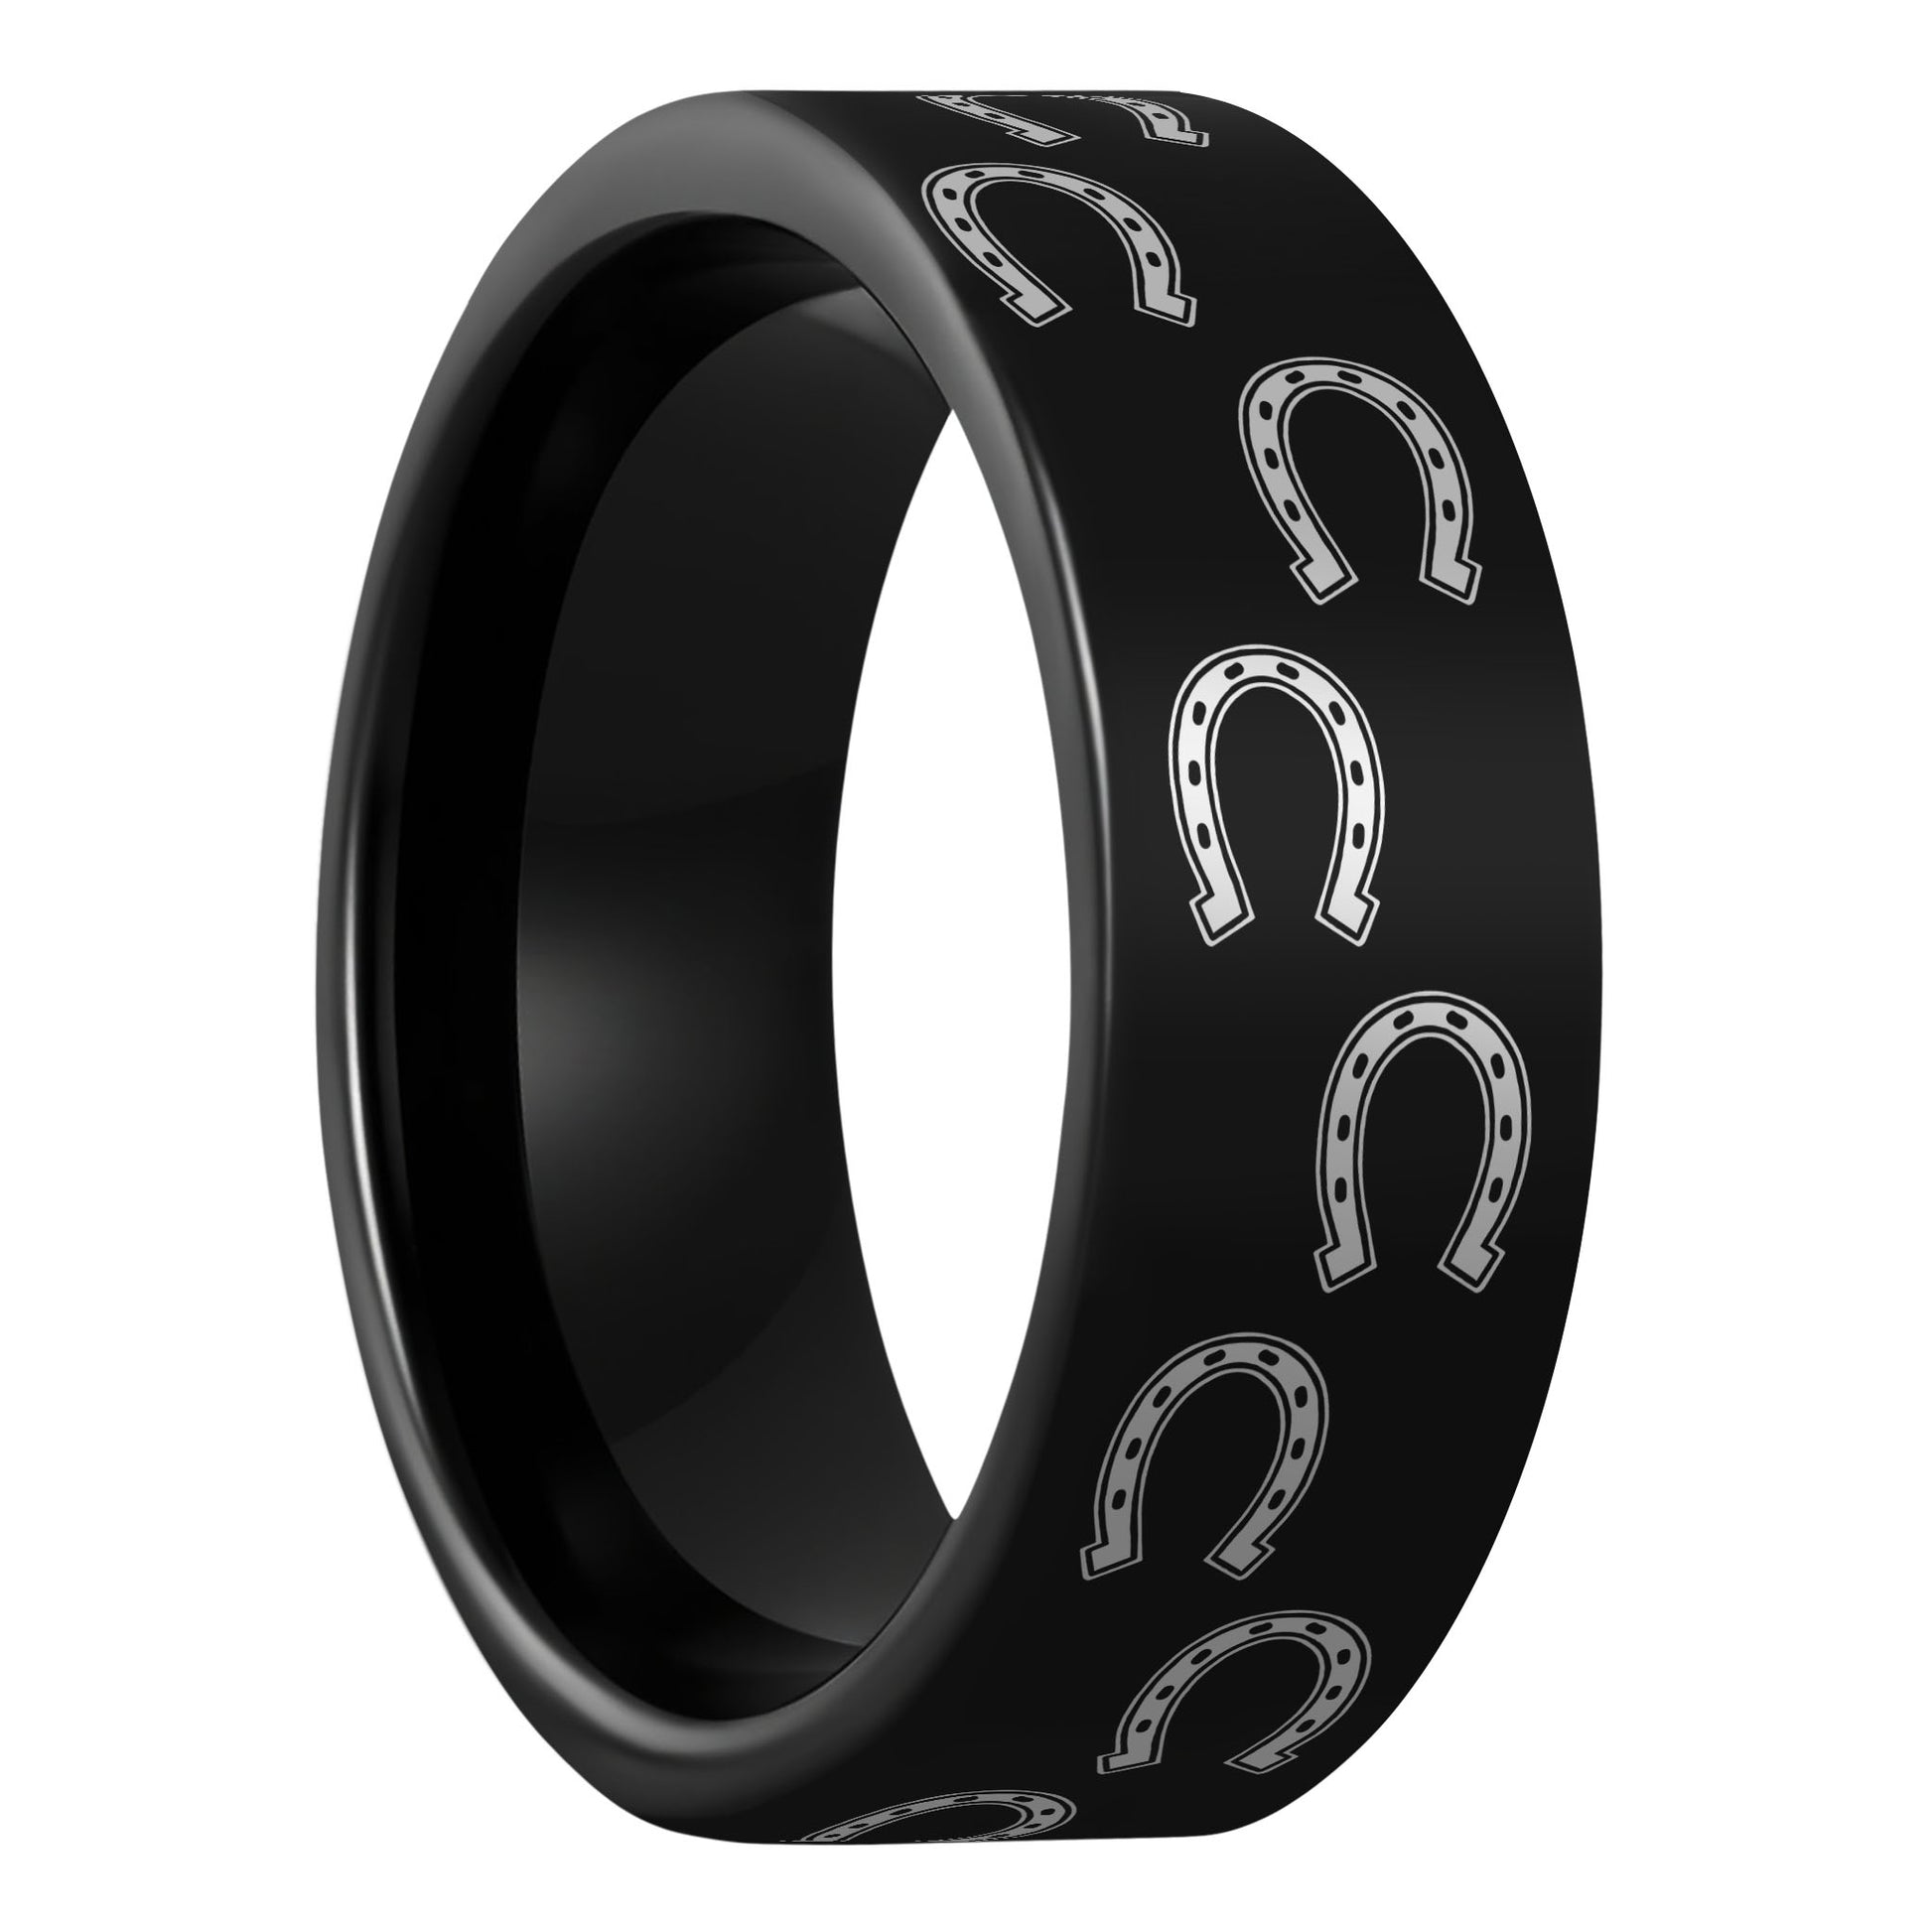 One Horseshoes Black Tungsten Men's Wedding Band displayed on a plain white background